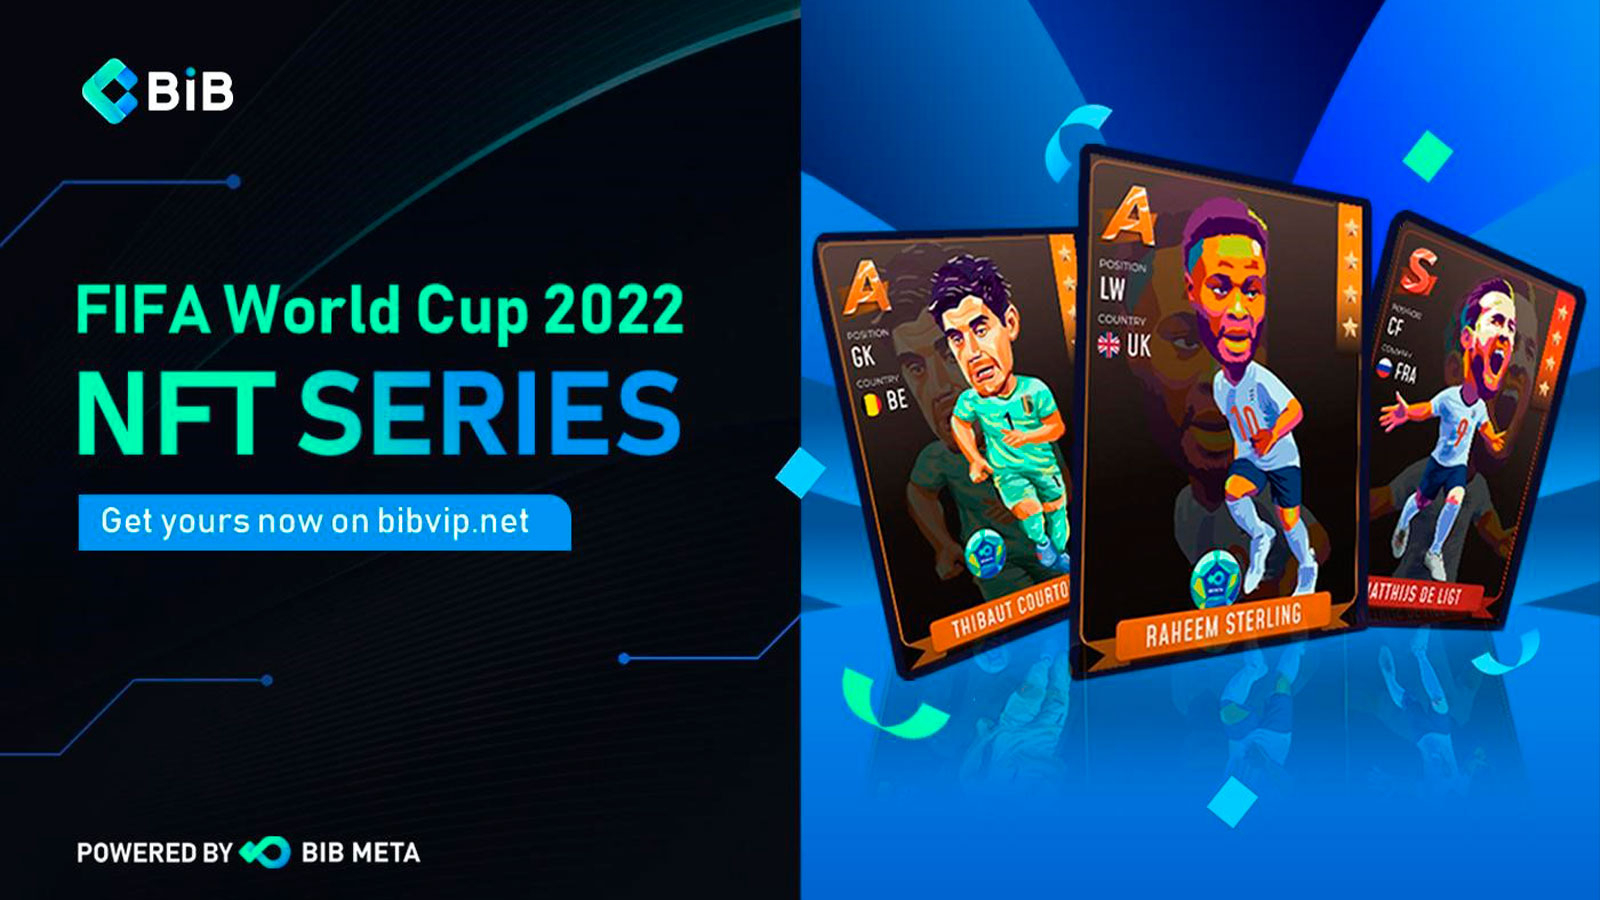 NFT Series to Create by BIB Meta for FIFA World Cup 2022